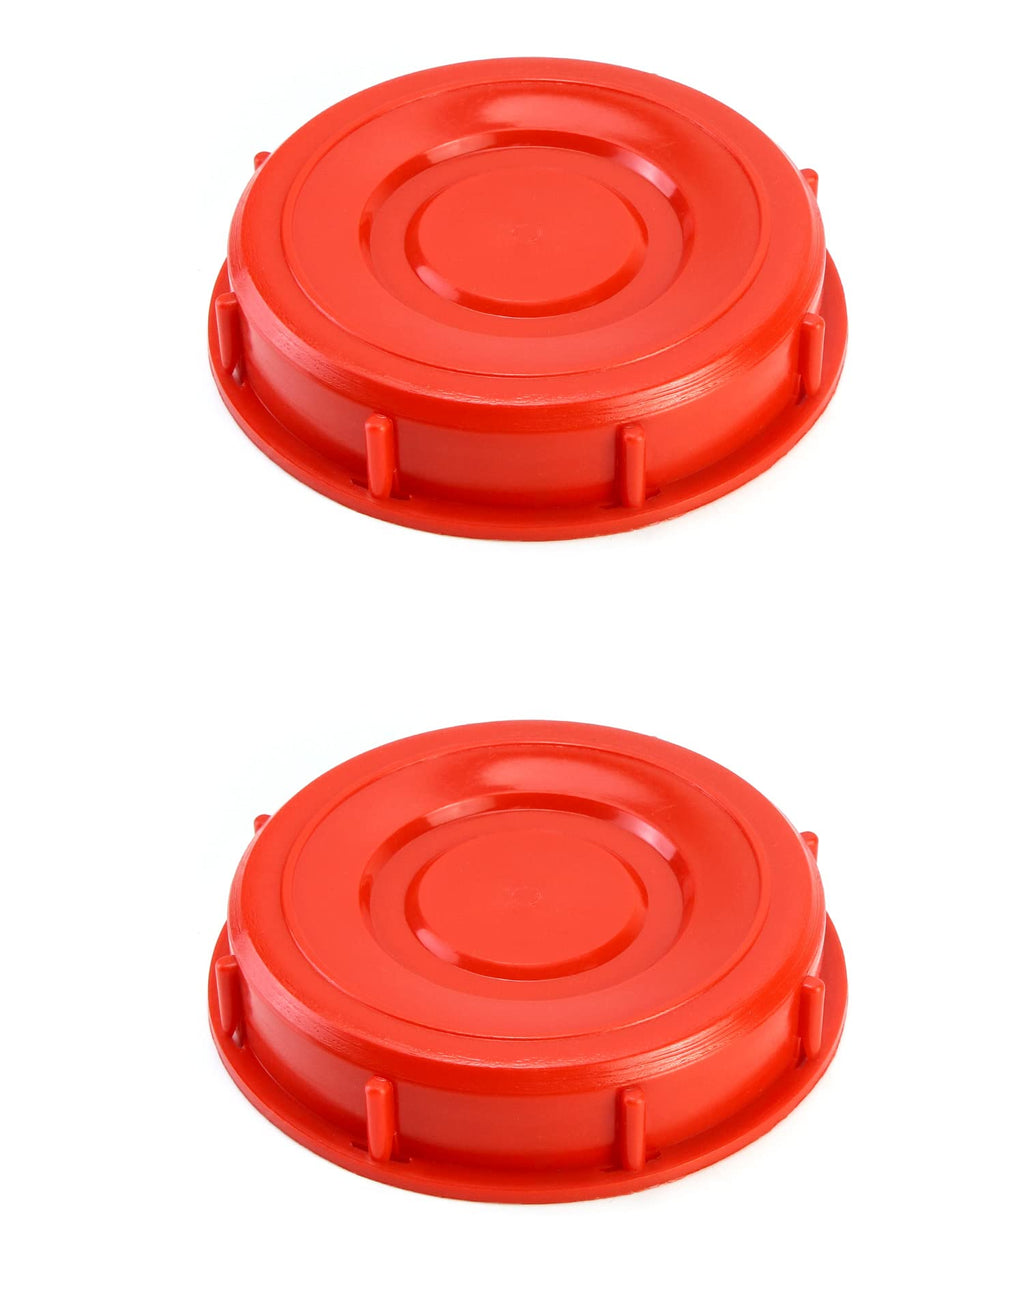  [AUSTRALIA] - QWORK IBC Tote Lid Cover, 6.5" IBC Tank Water Liquid Tank Cap for Chemical, Food, Industries Storage, Red, 2 Pack Red #B